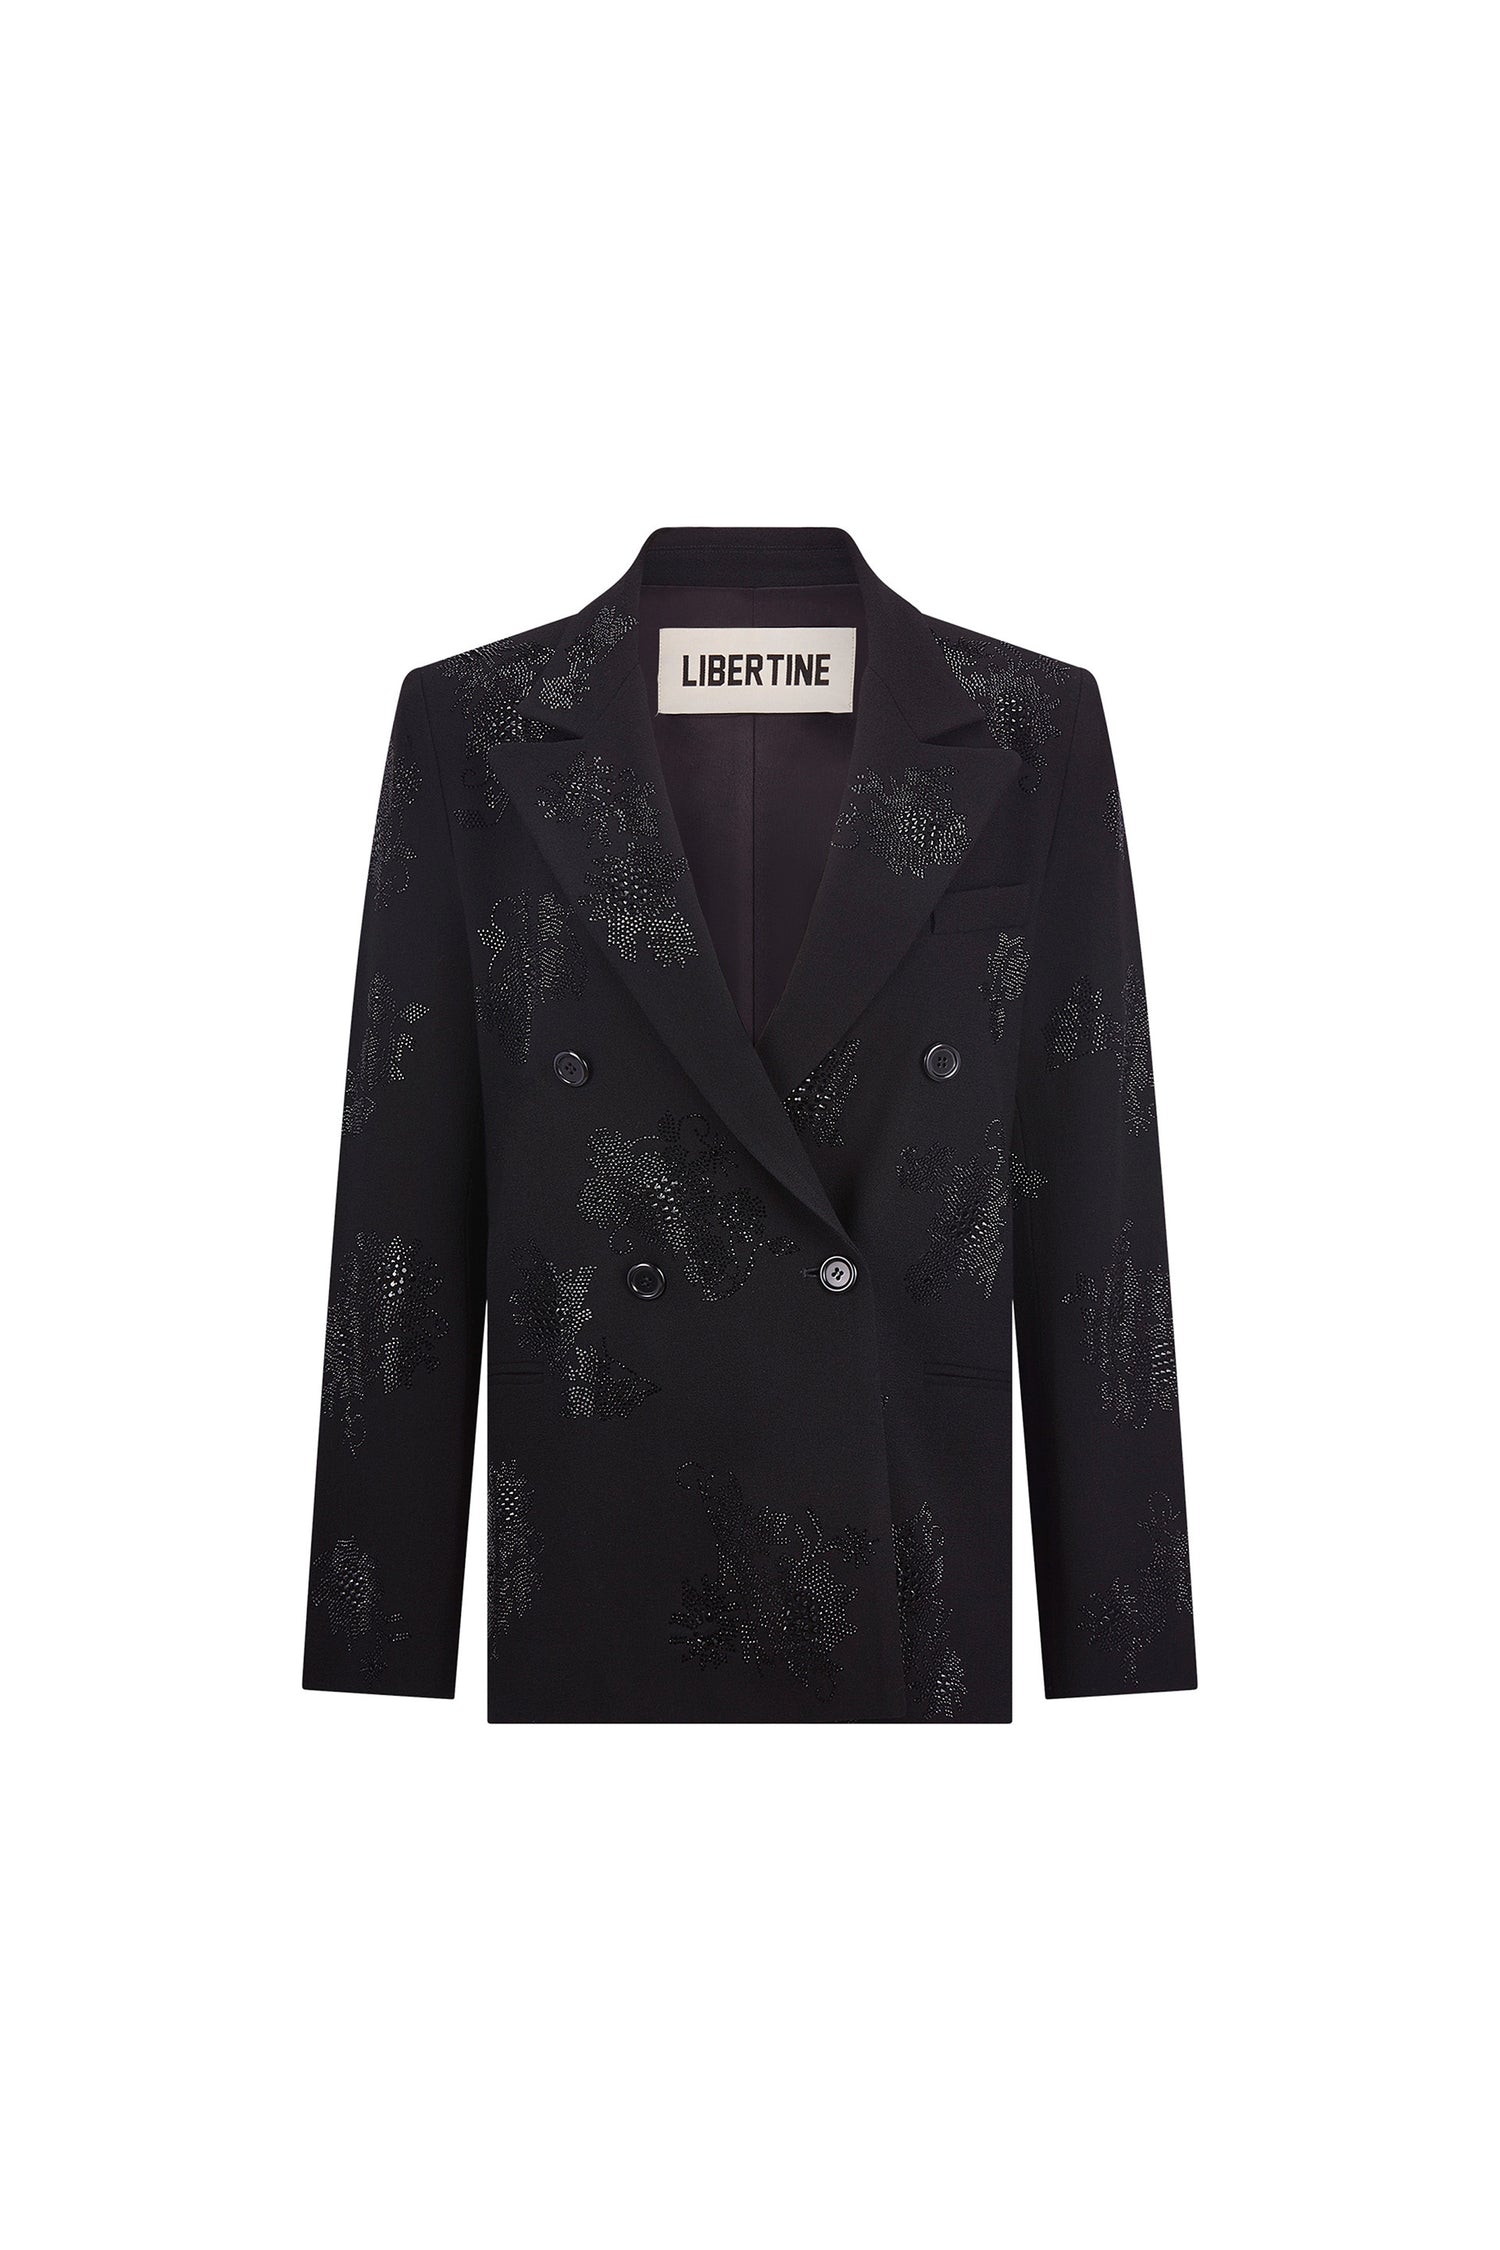 'GOTHIC GARDEN' DOUBLE BREASTED JACKET -  - Libertine